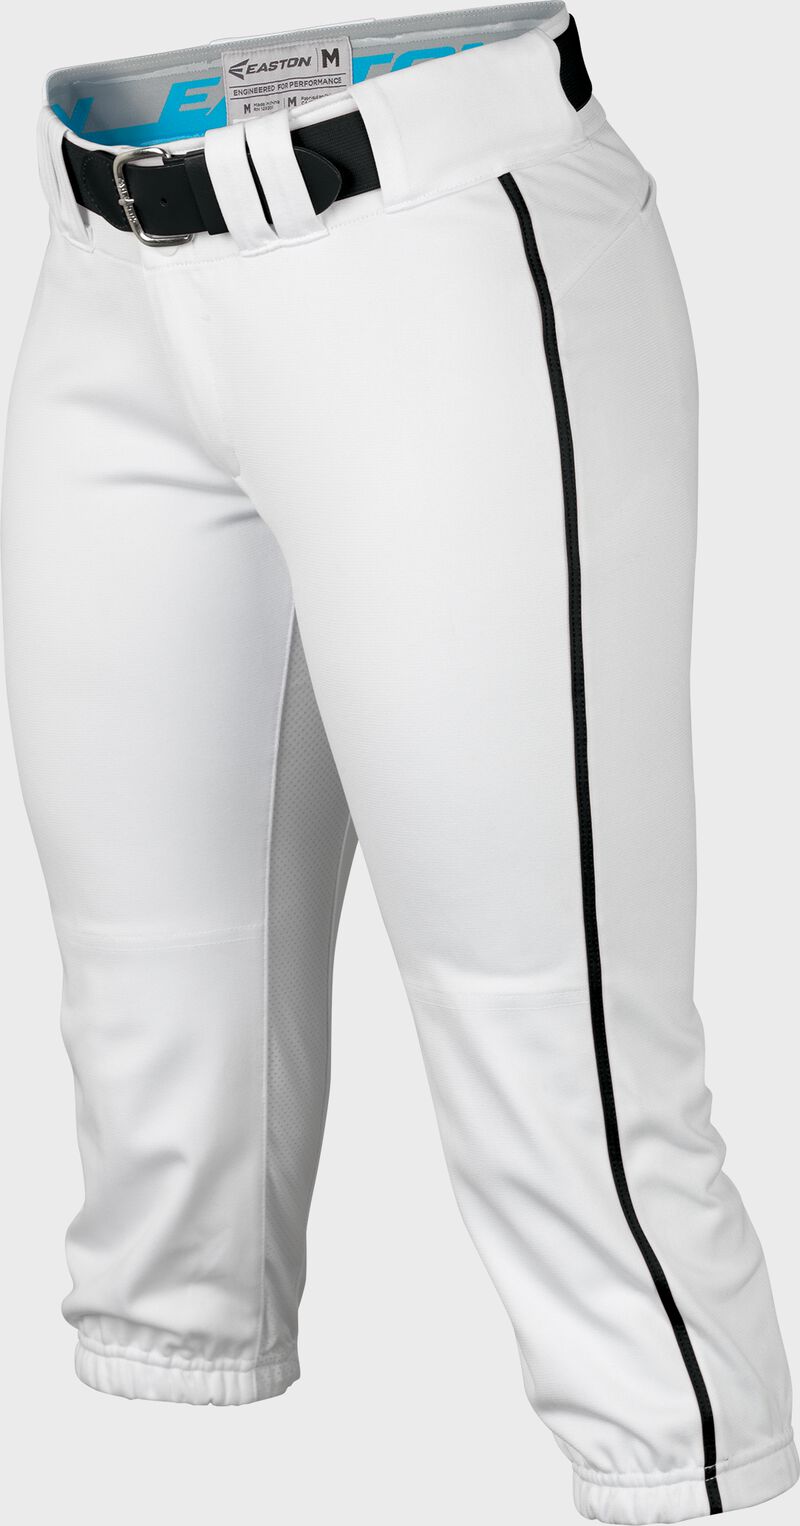 Easton Prowess Softball Pant Women's Piped WHITE/NAVY  XL loading=